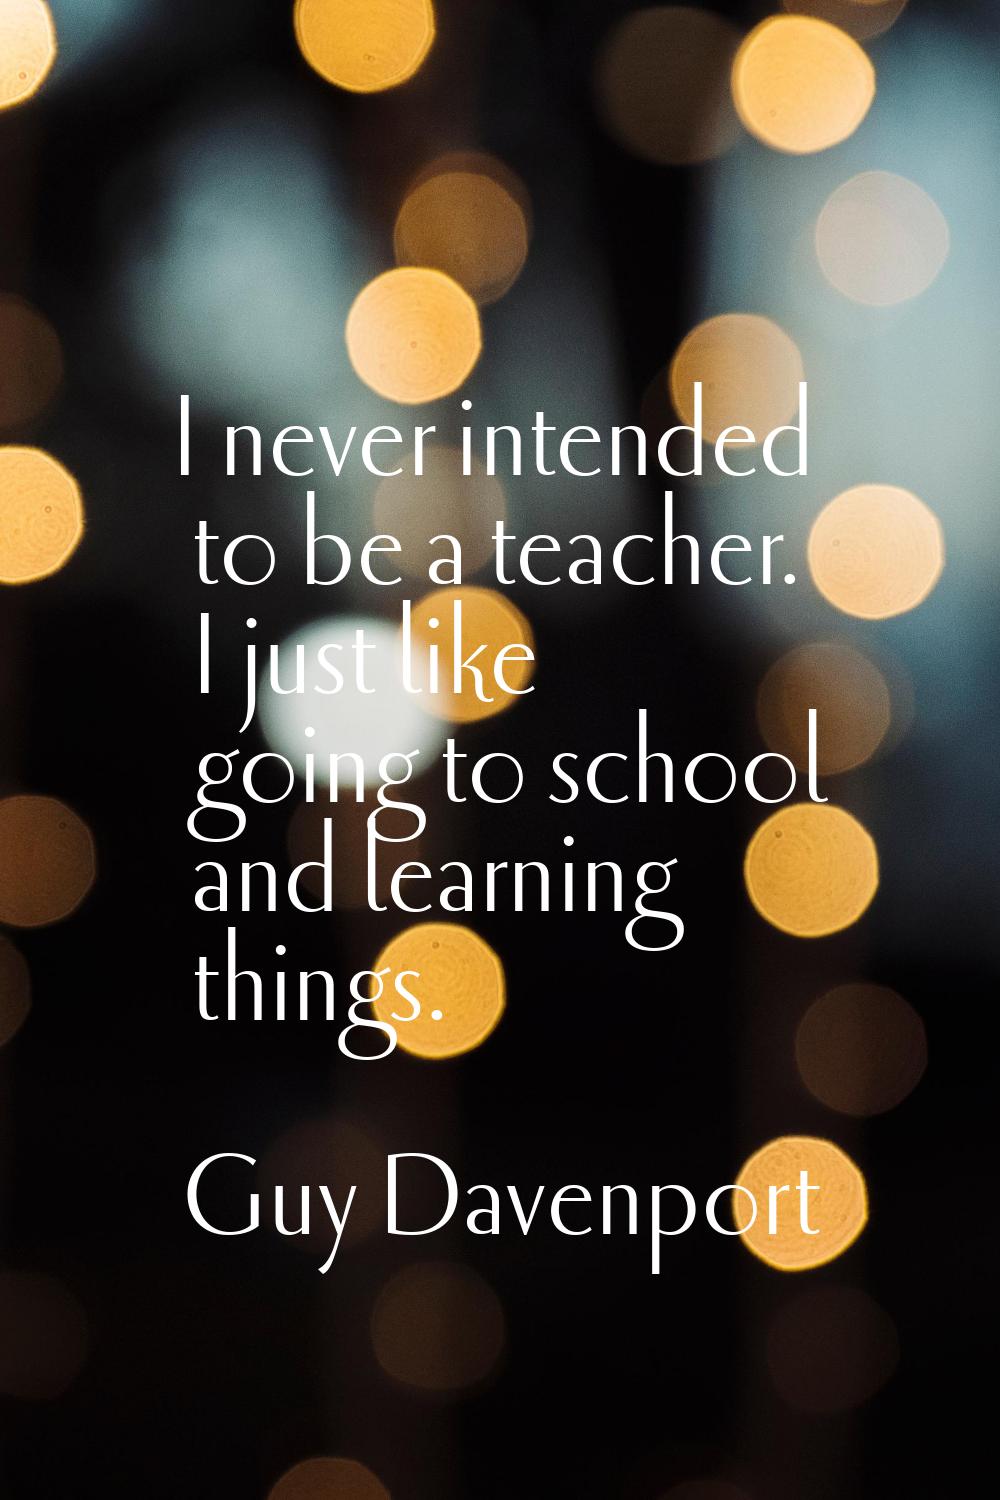 I never intended to be a teacher. I just like going to school and learning things.